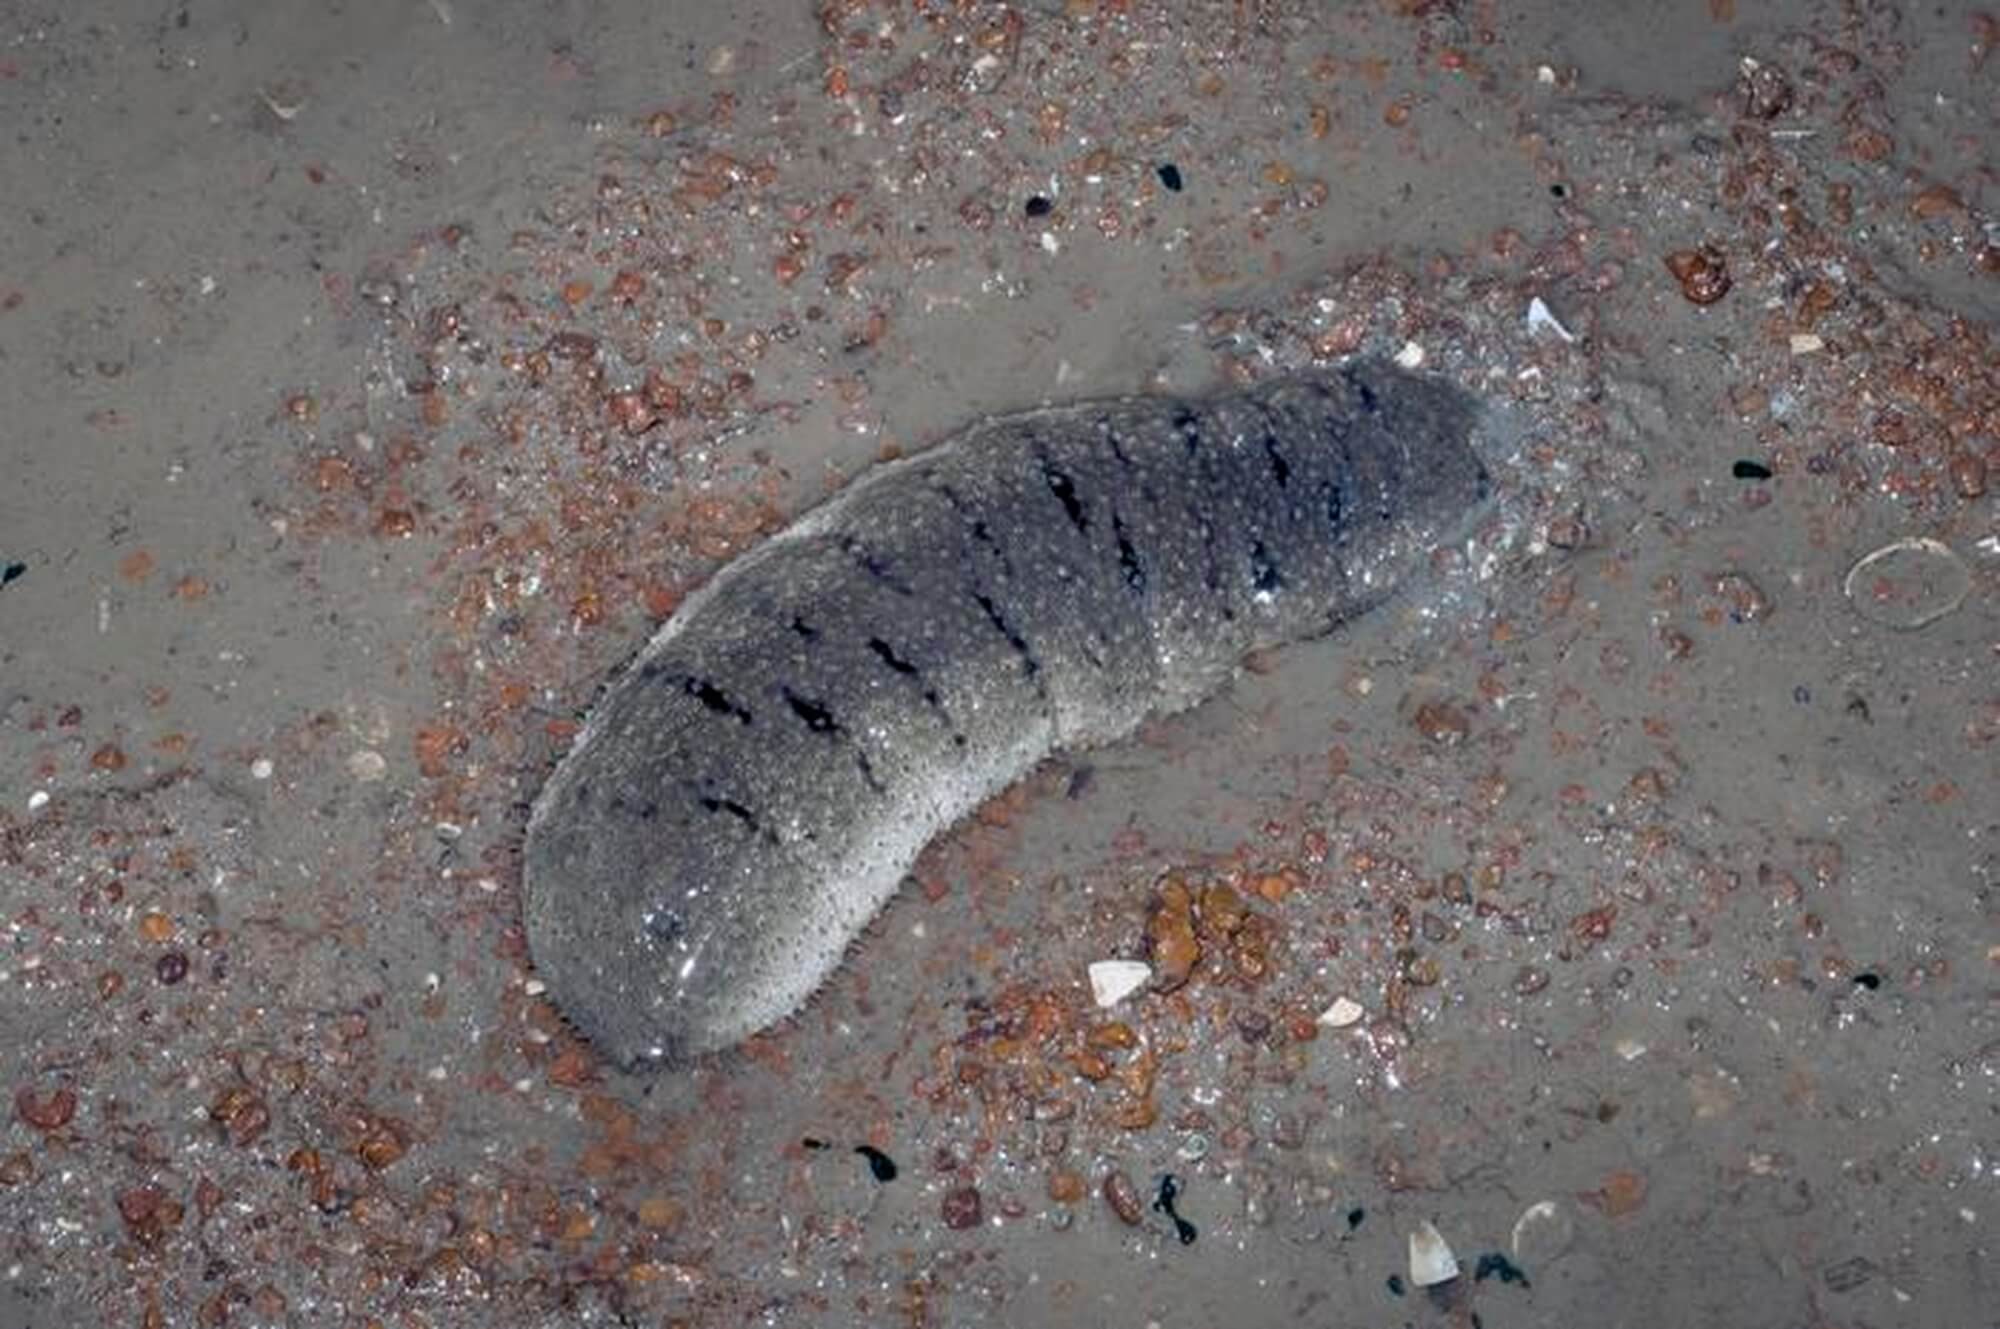 The bioactive compounds in sea cucumbers could protect against Type 2 Diabetes.